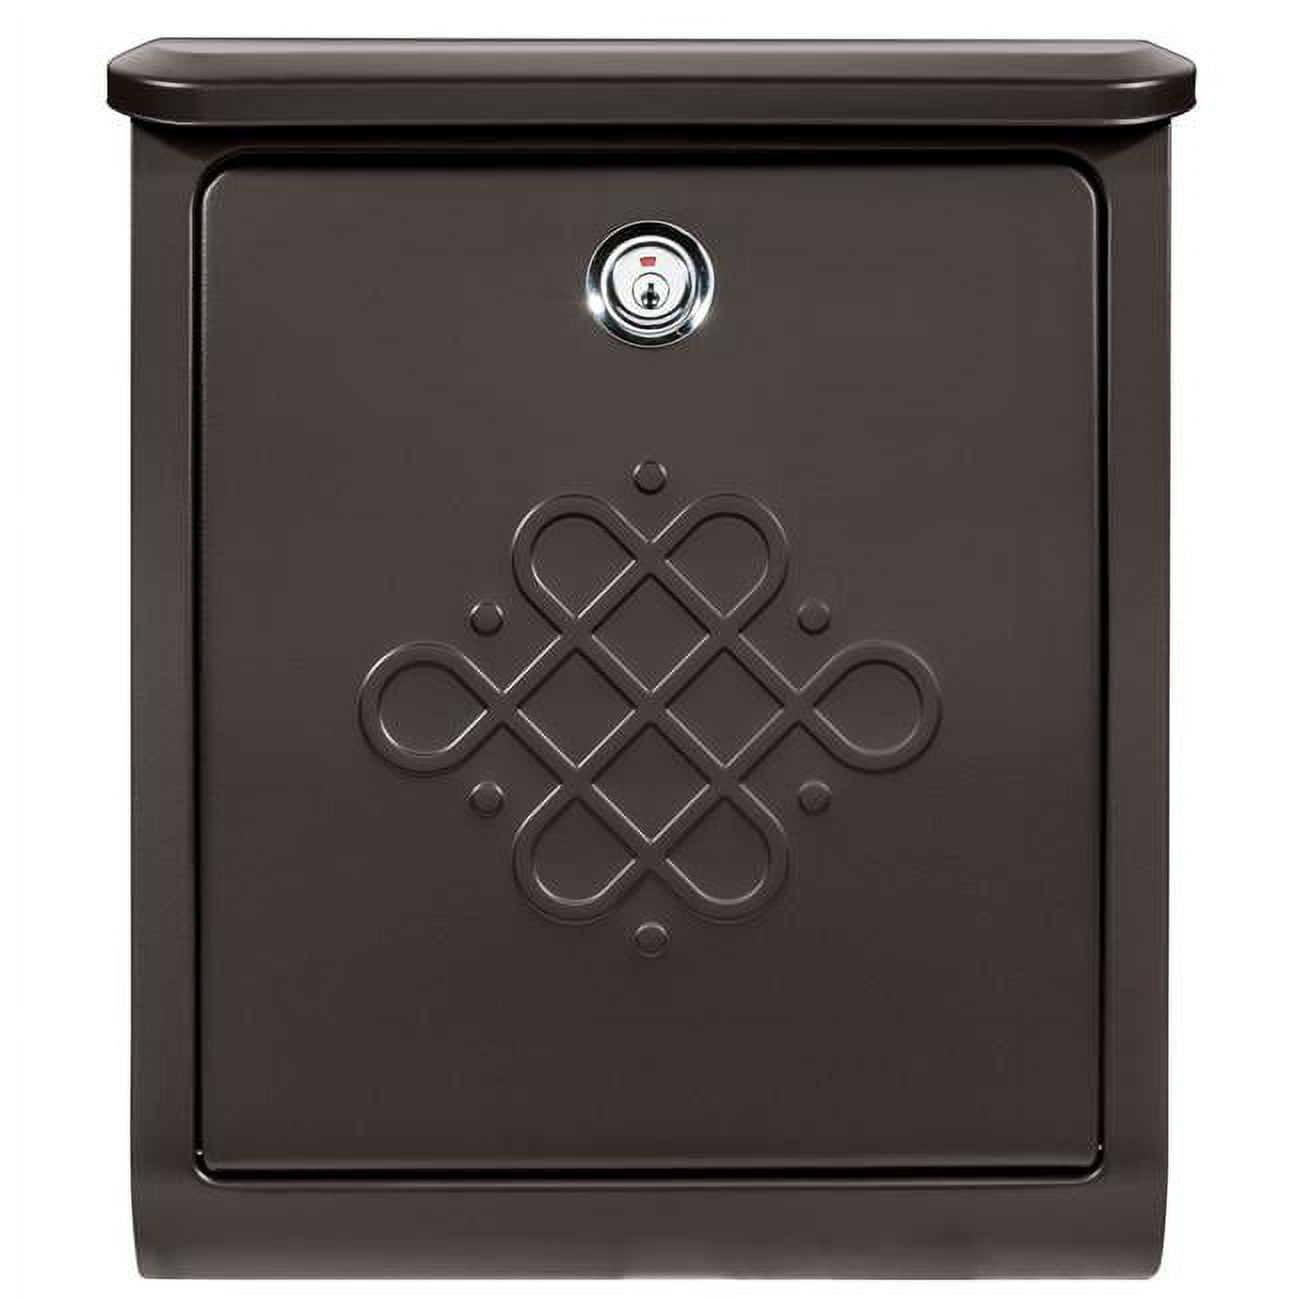 Picture of Architectural Mailboxes 2697RZ-10 Bordeaux Locking Wall Mount Mailbox - Rubbed Bronze - Medium